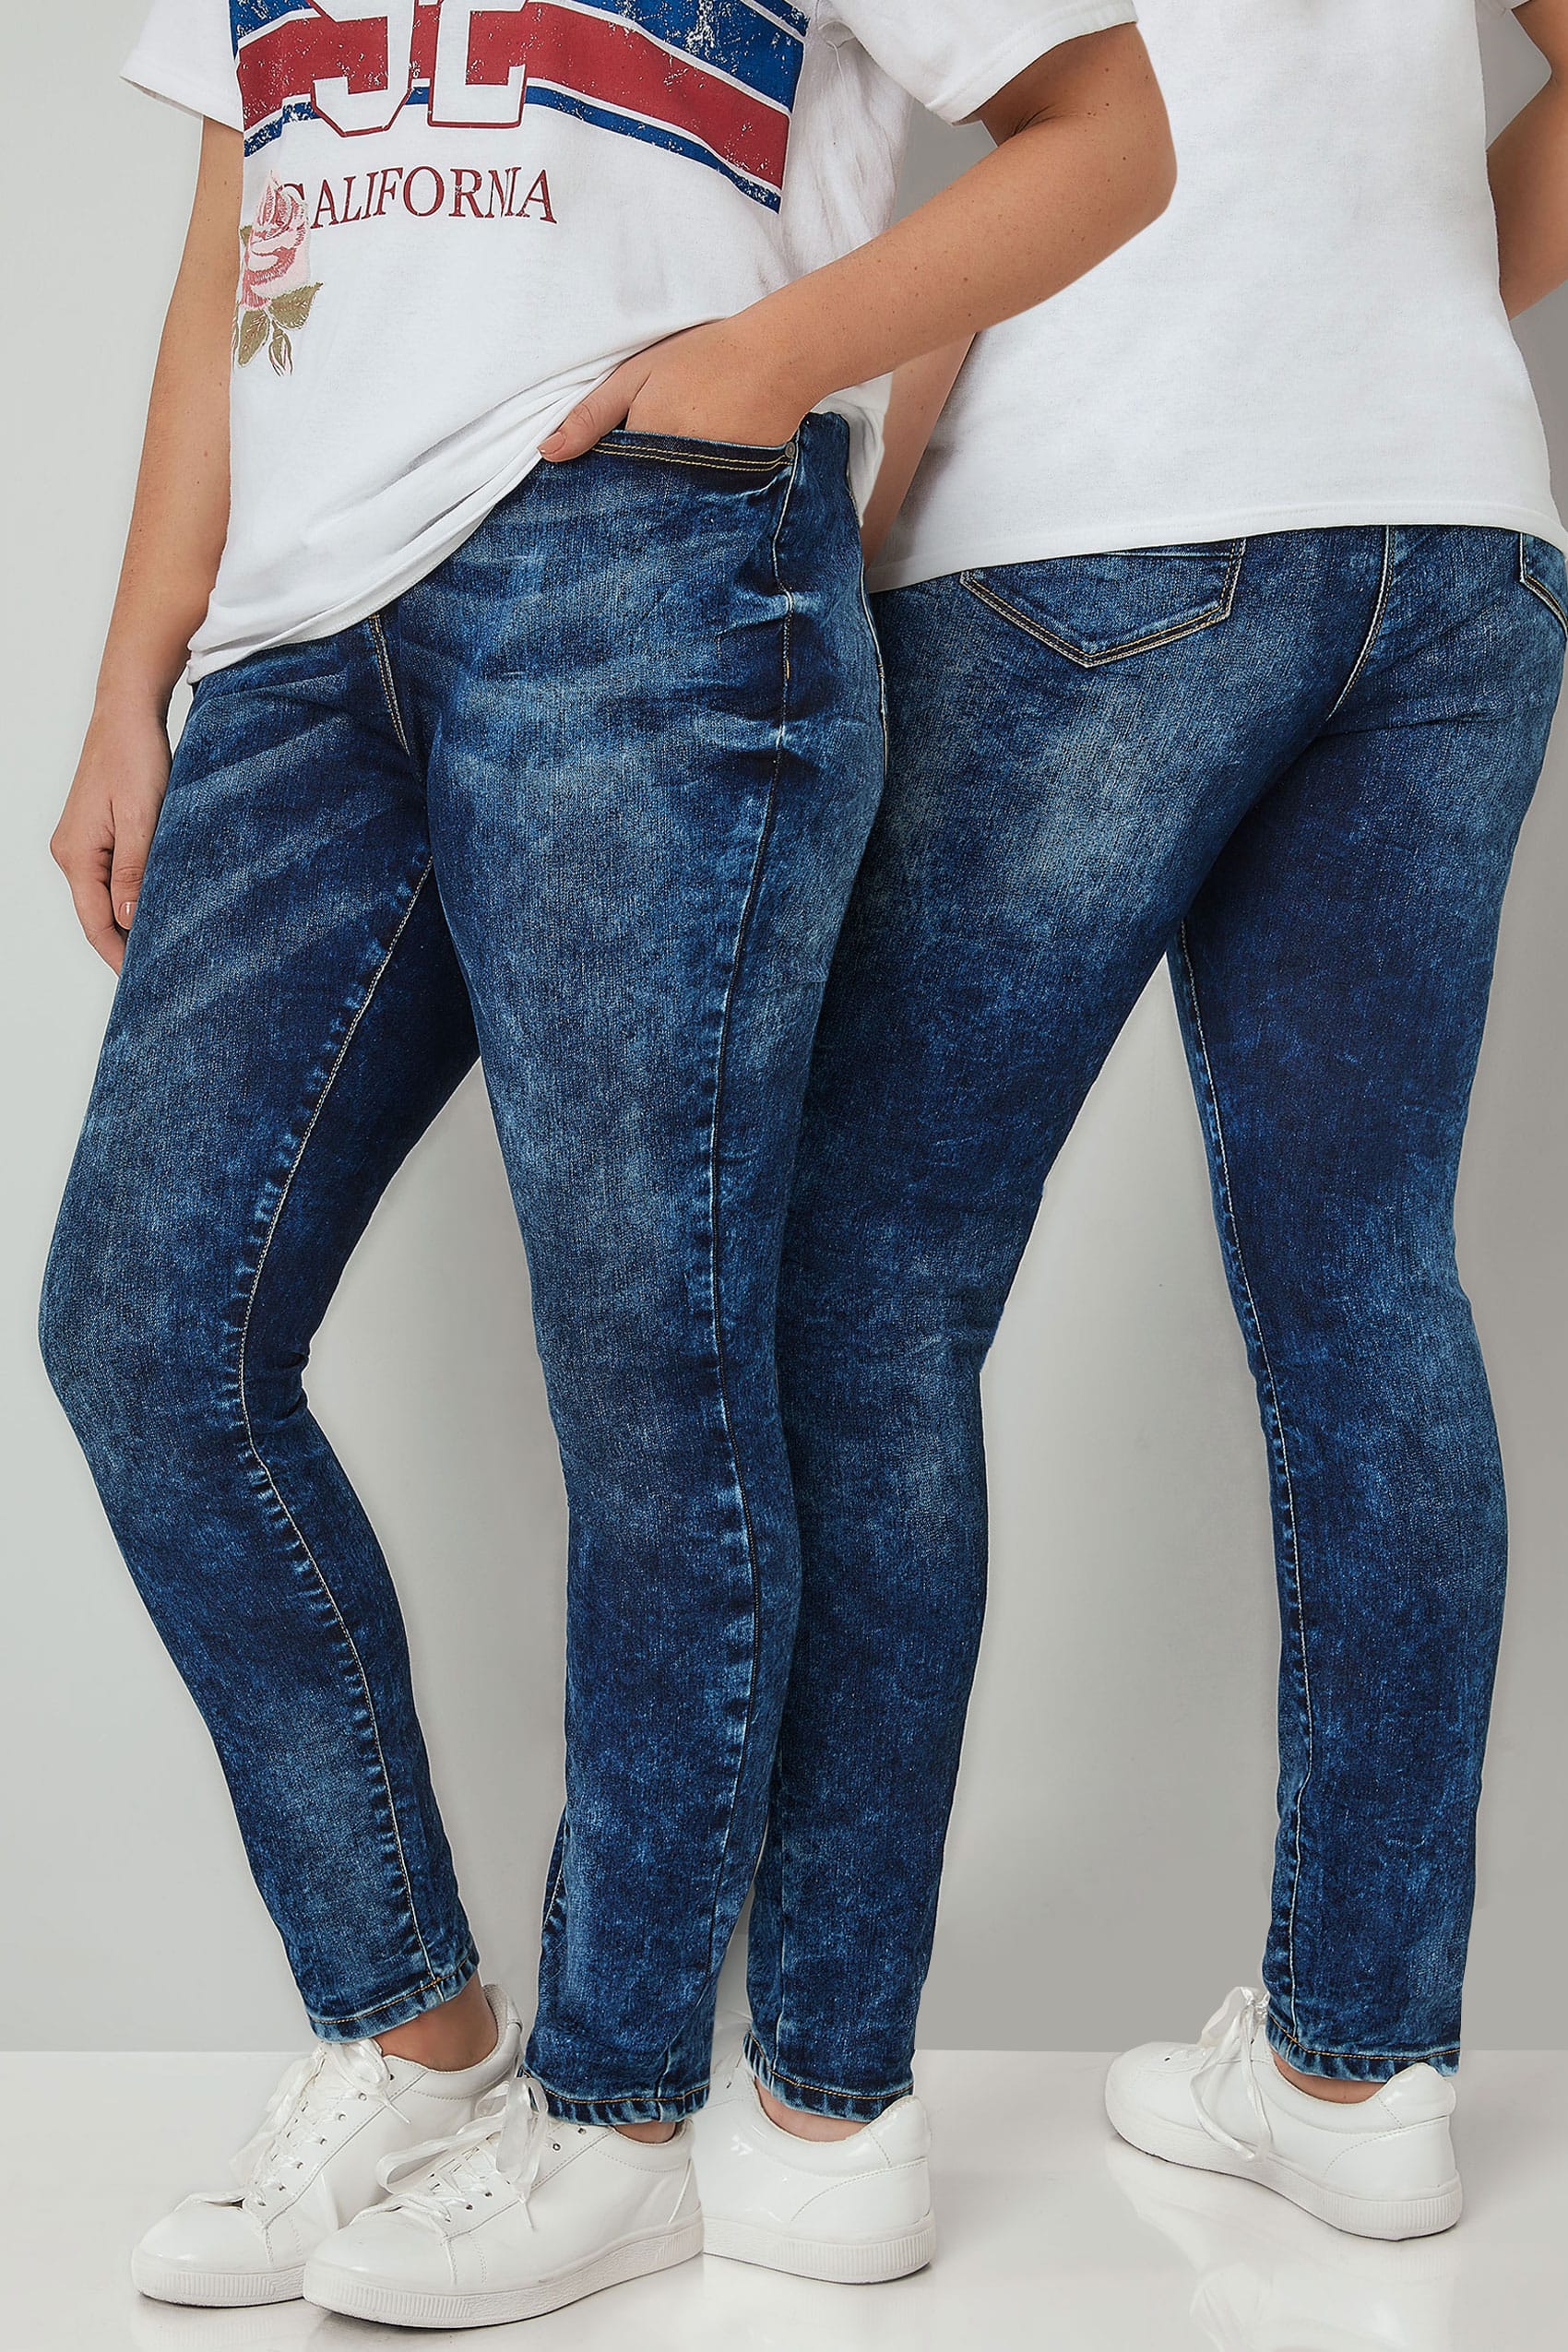 Limited Collection Blue Acid Wash Skinny Jeans Plus Size